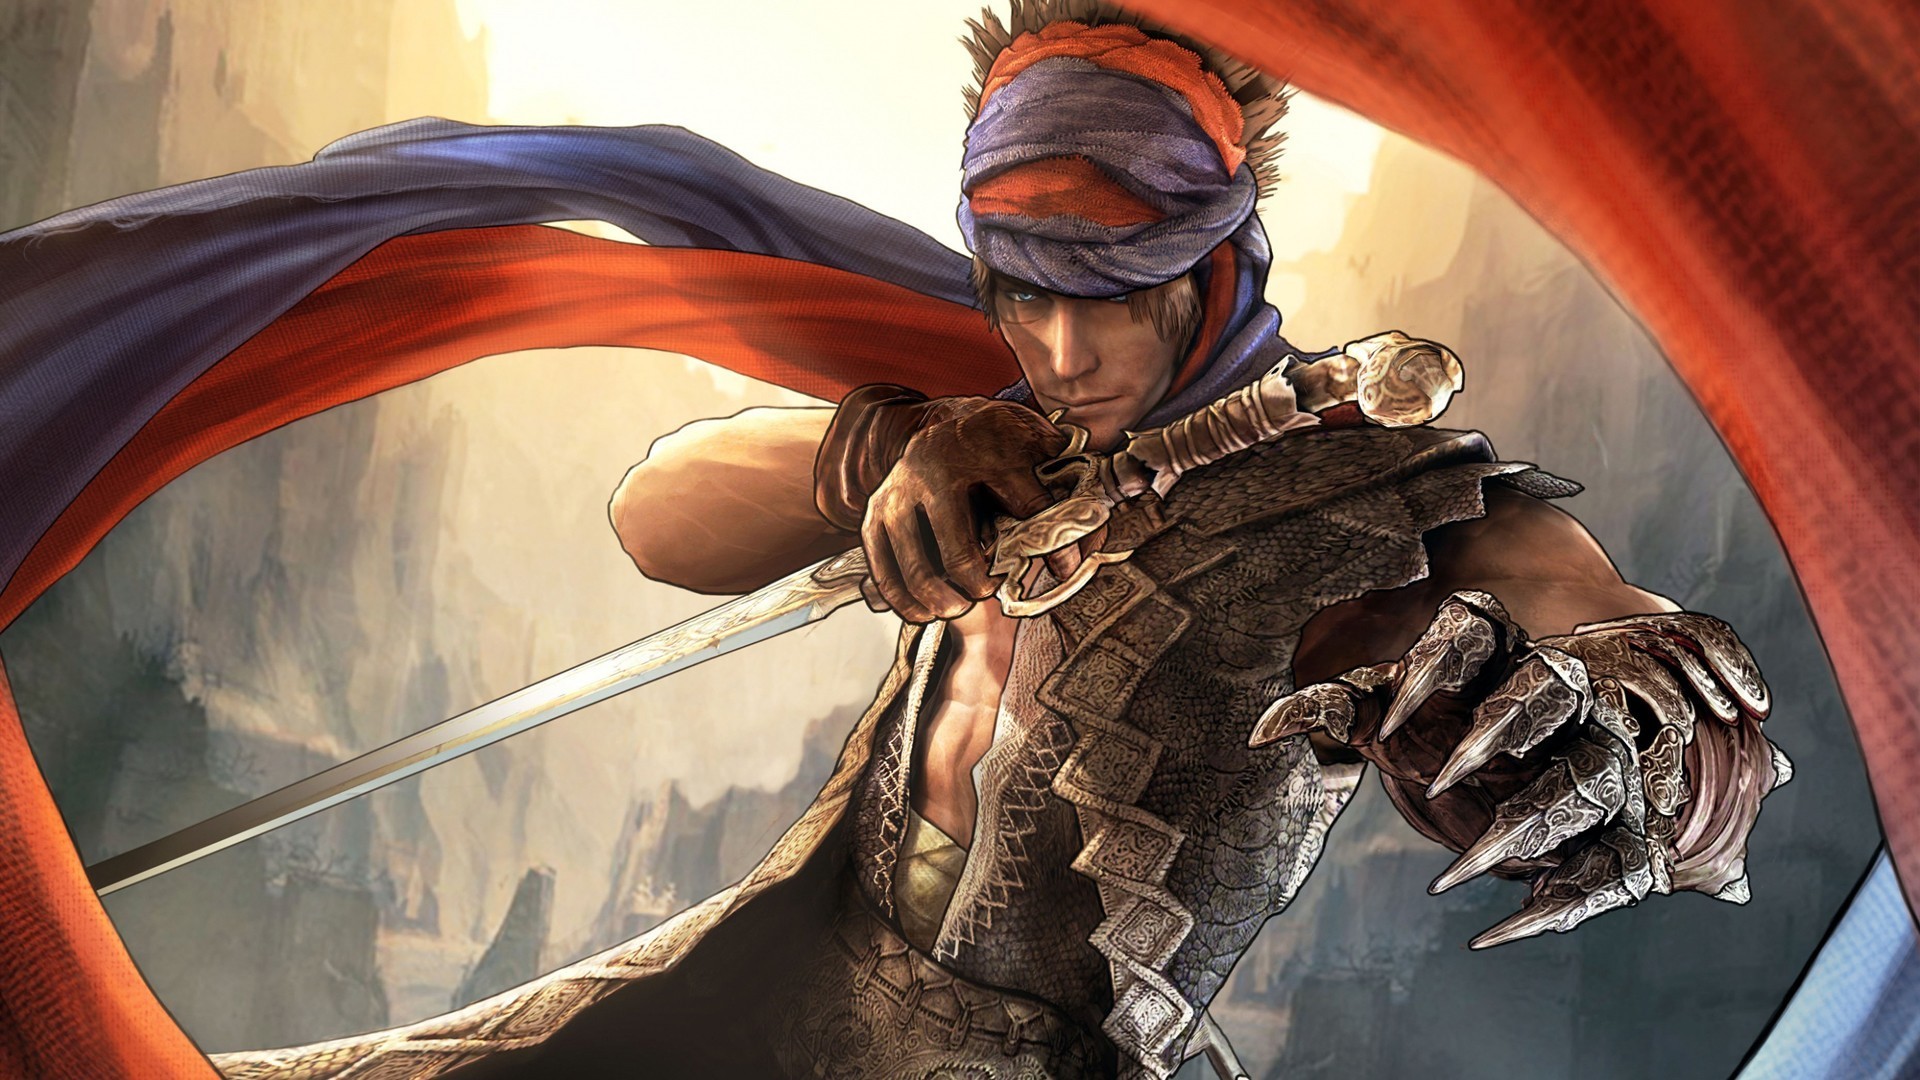 Sword Scarf Red Prince Of Persia 2008 1920x1080